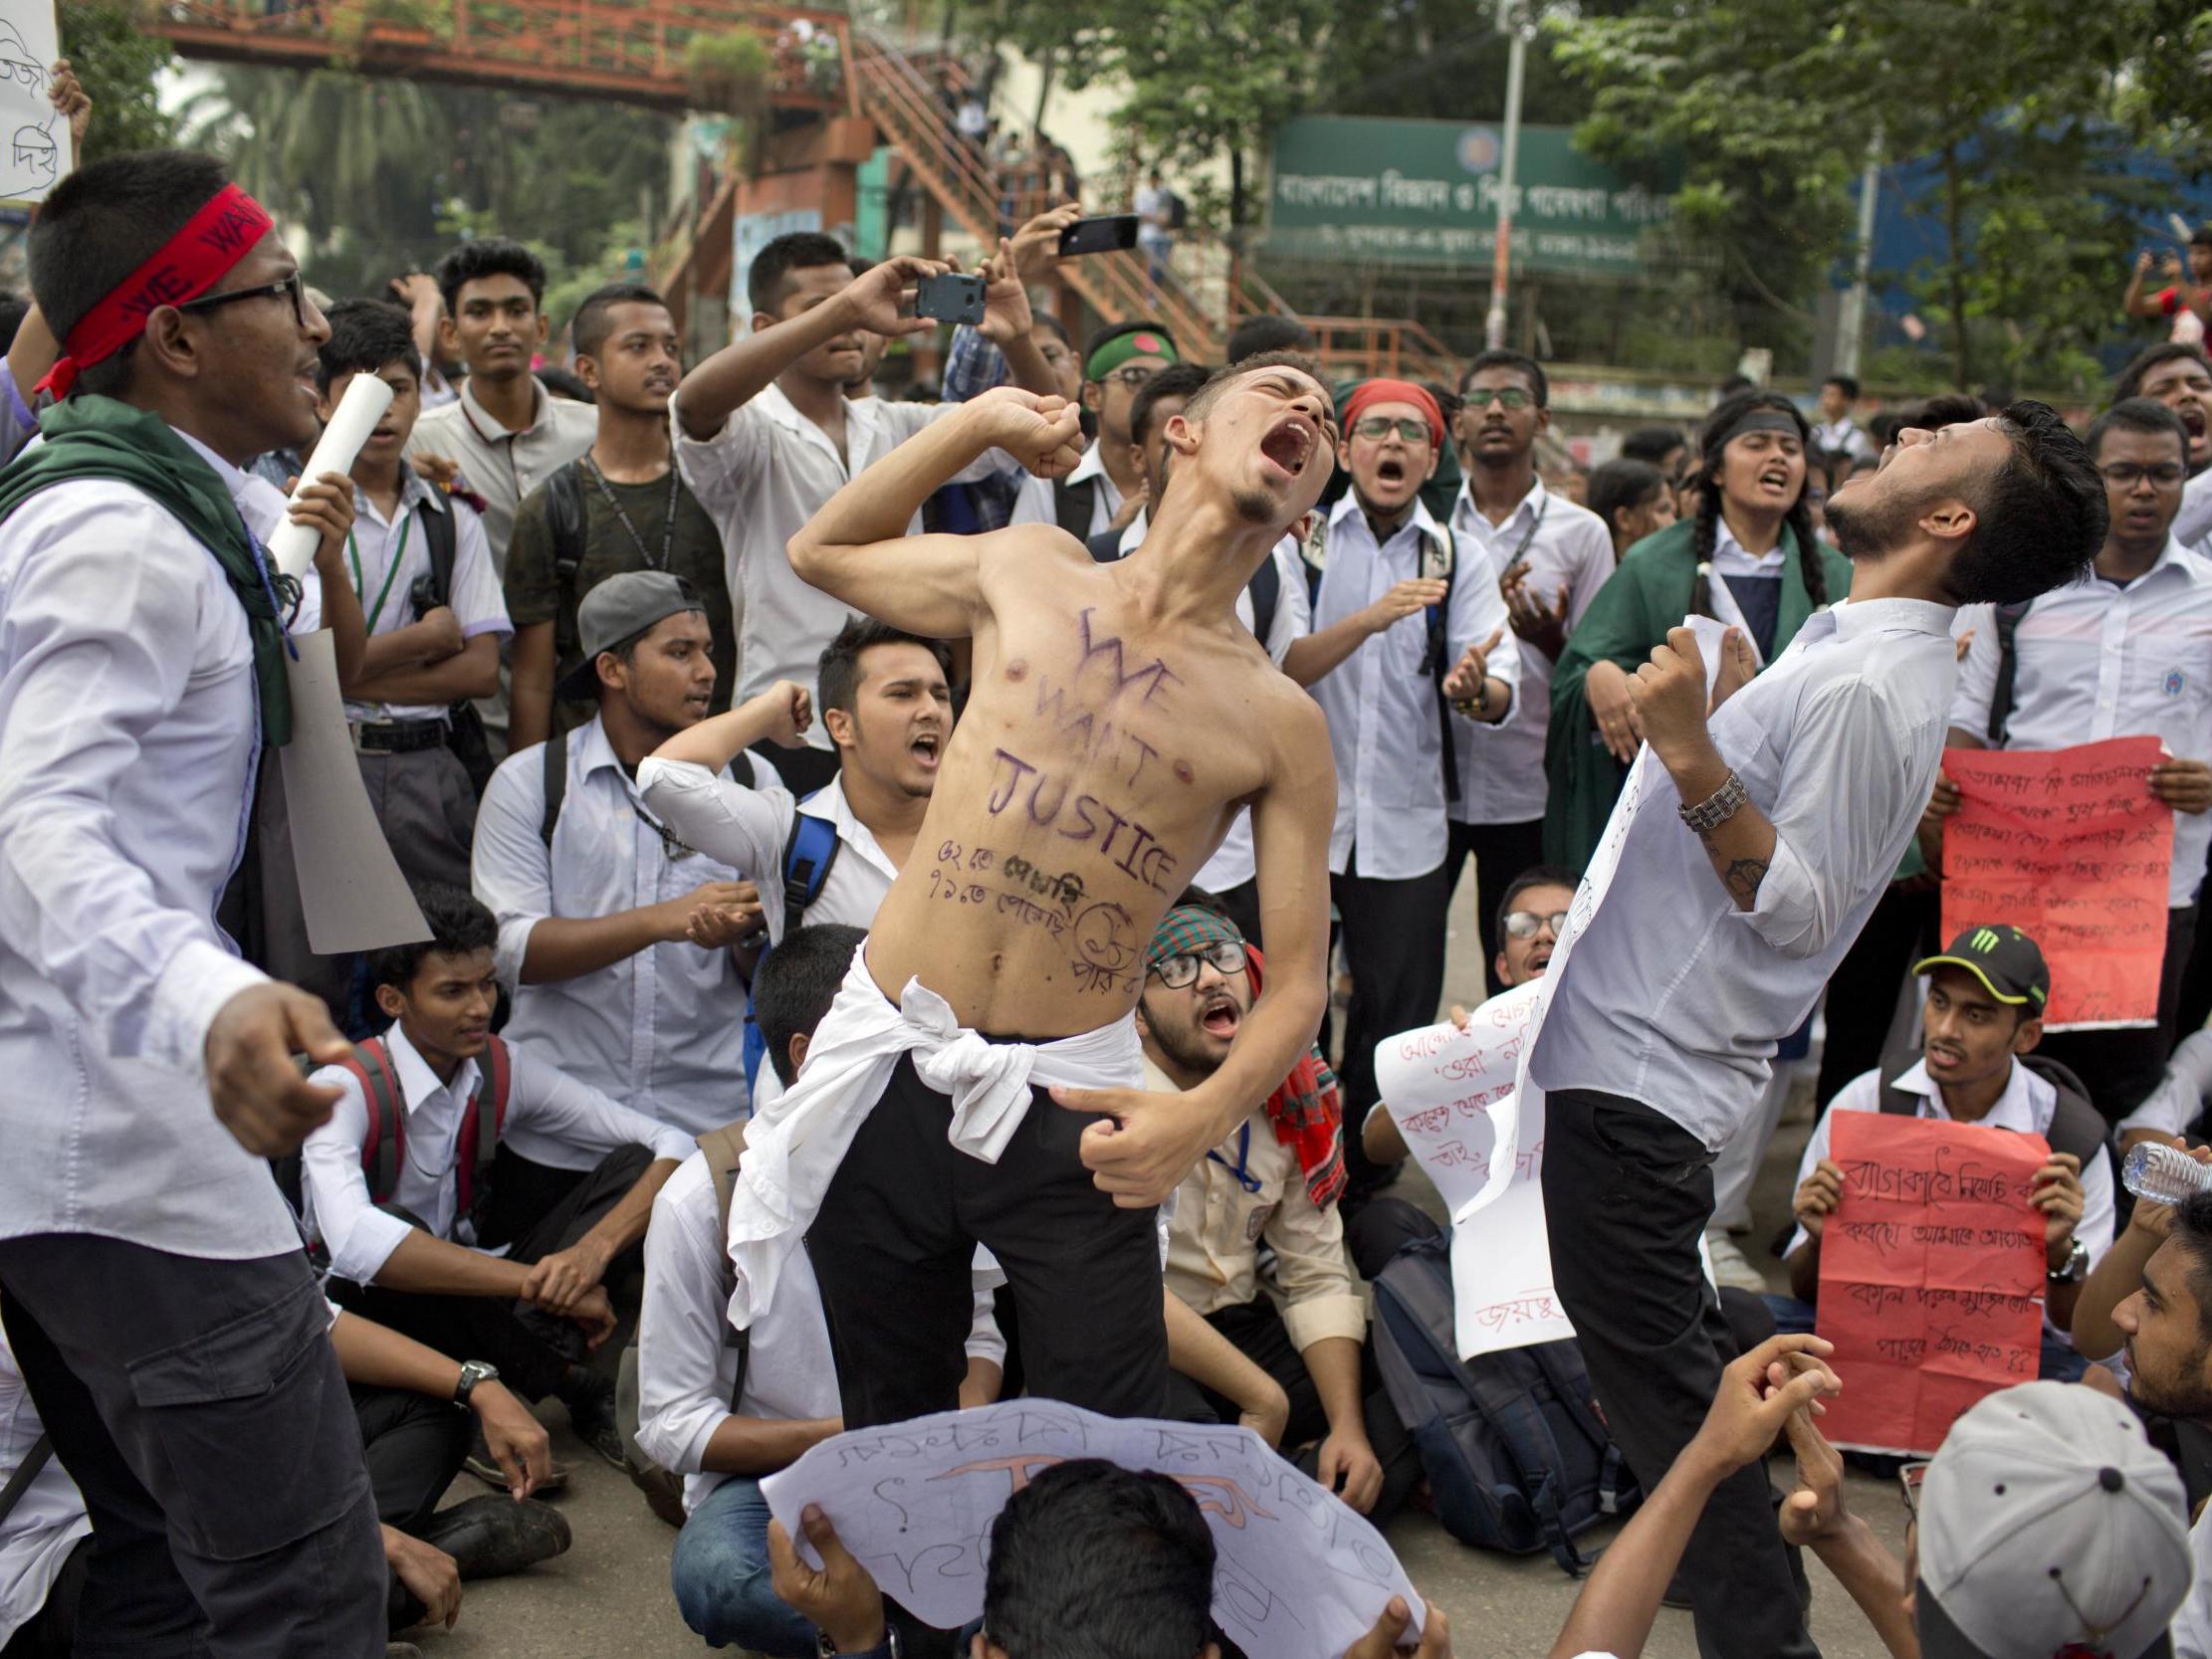 Students shout slogans and block a road during a protest following two people's deaths